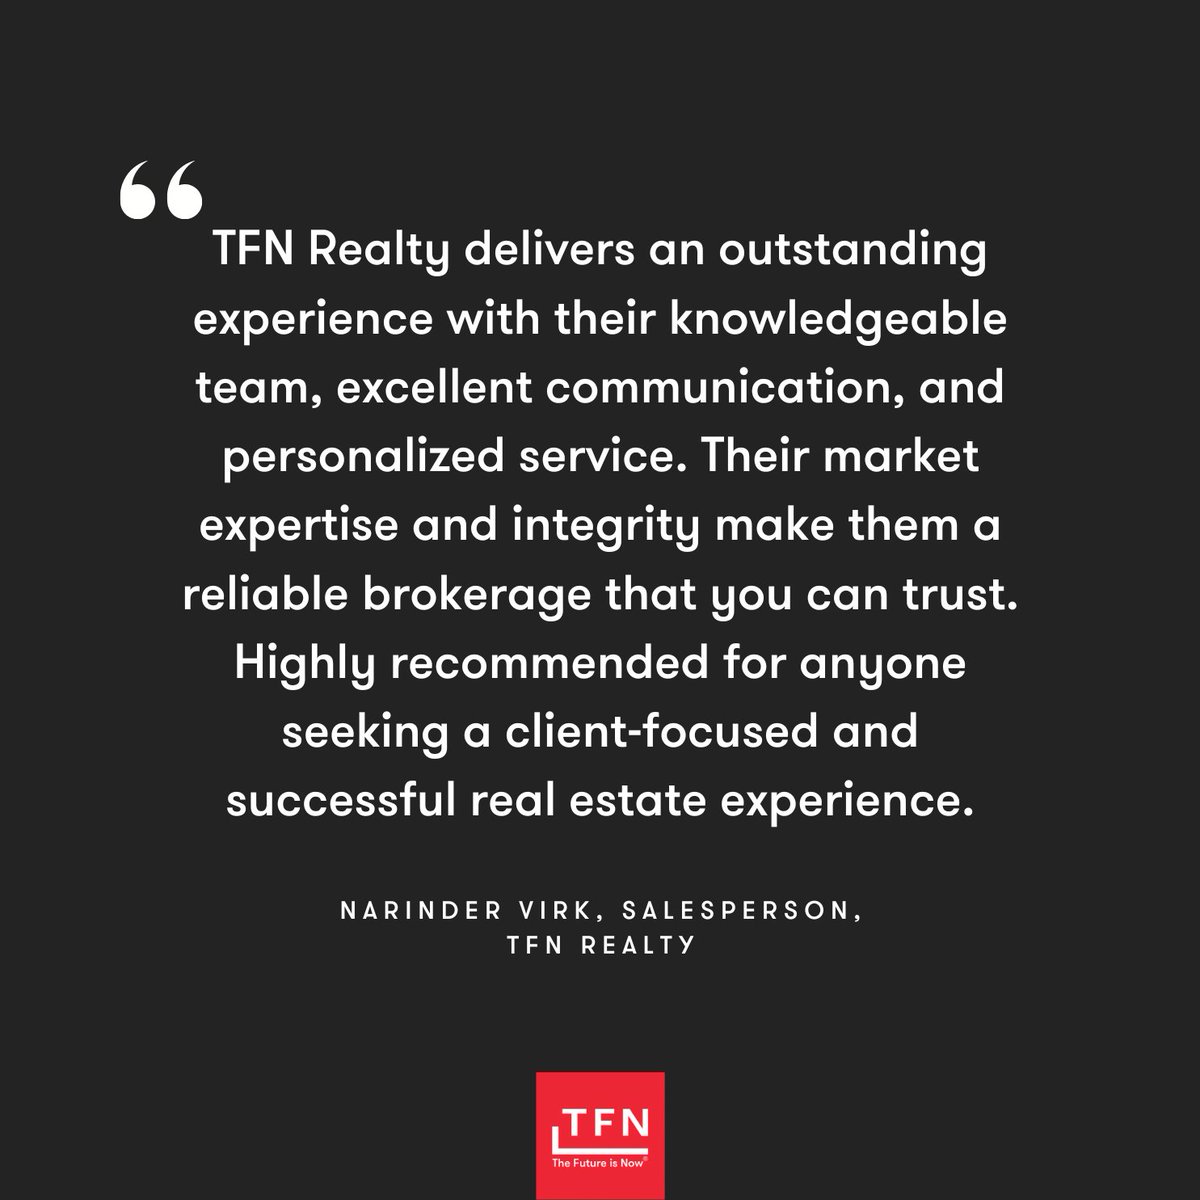 At TFN Realty, it's all about the experience. Hear from our team!
#RealEstateExcellence #ClientFirst #TFNRealty #TheFutureIsNow